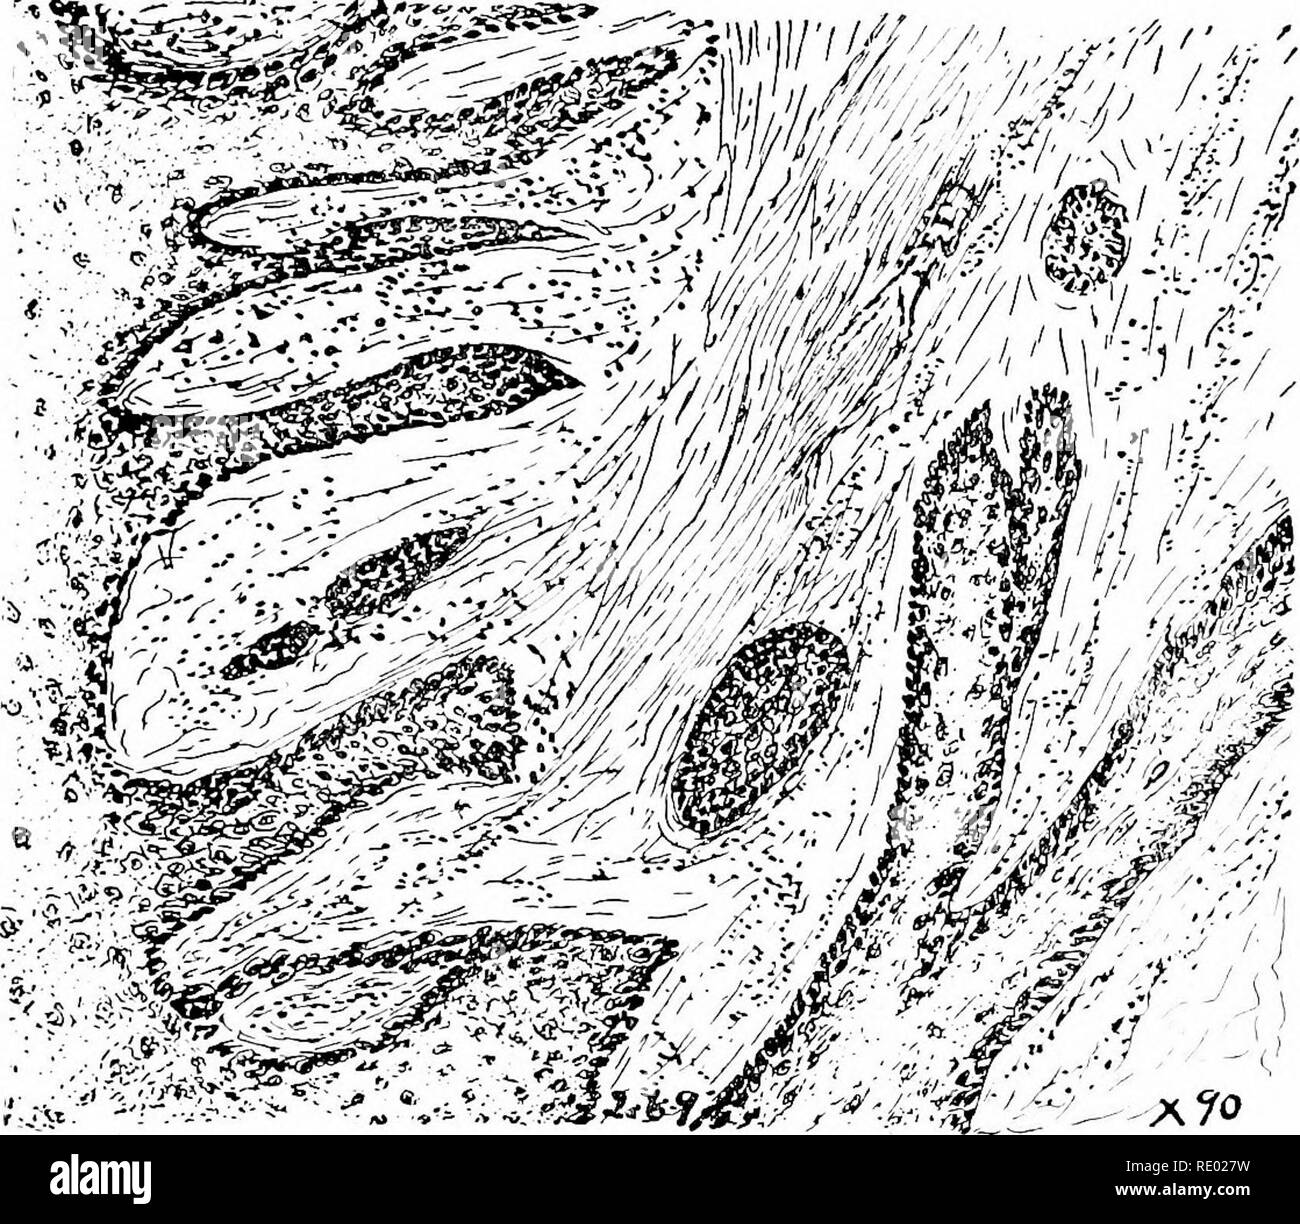 Adjacent cells Black and White Stock Photos & Images - Page 2 - Alamy